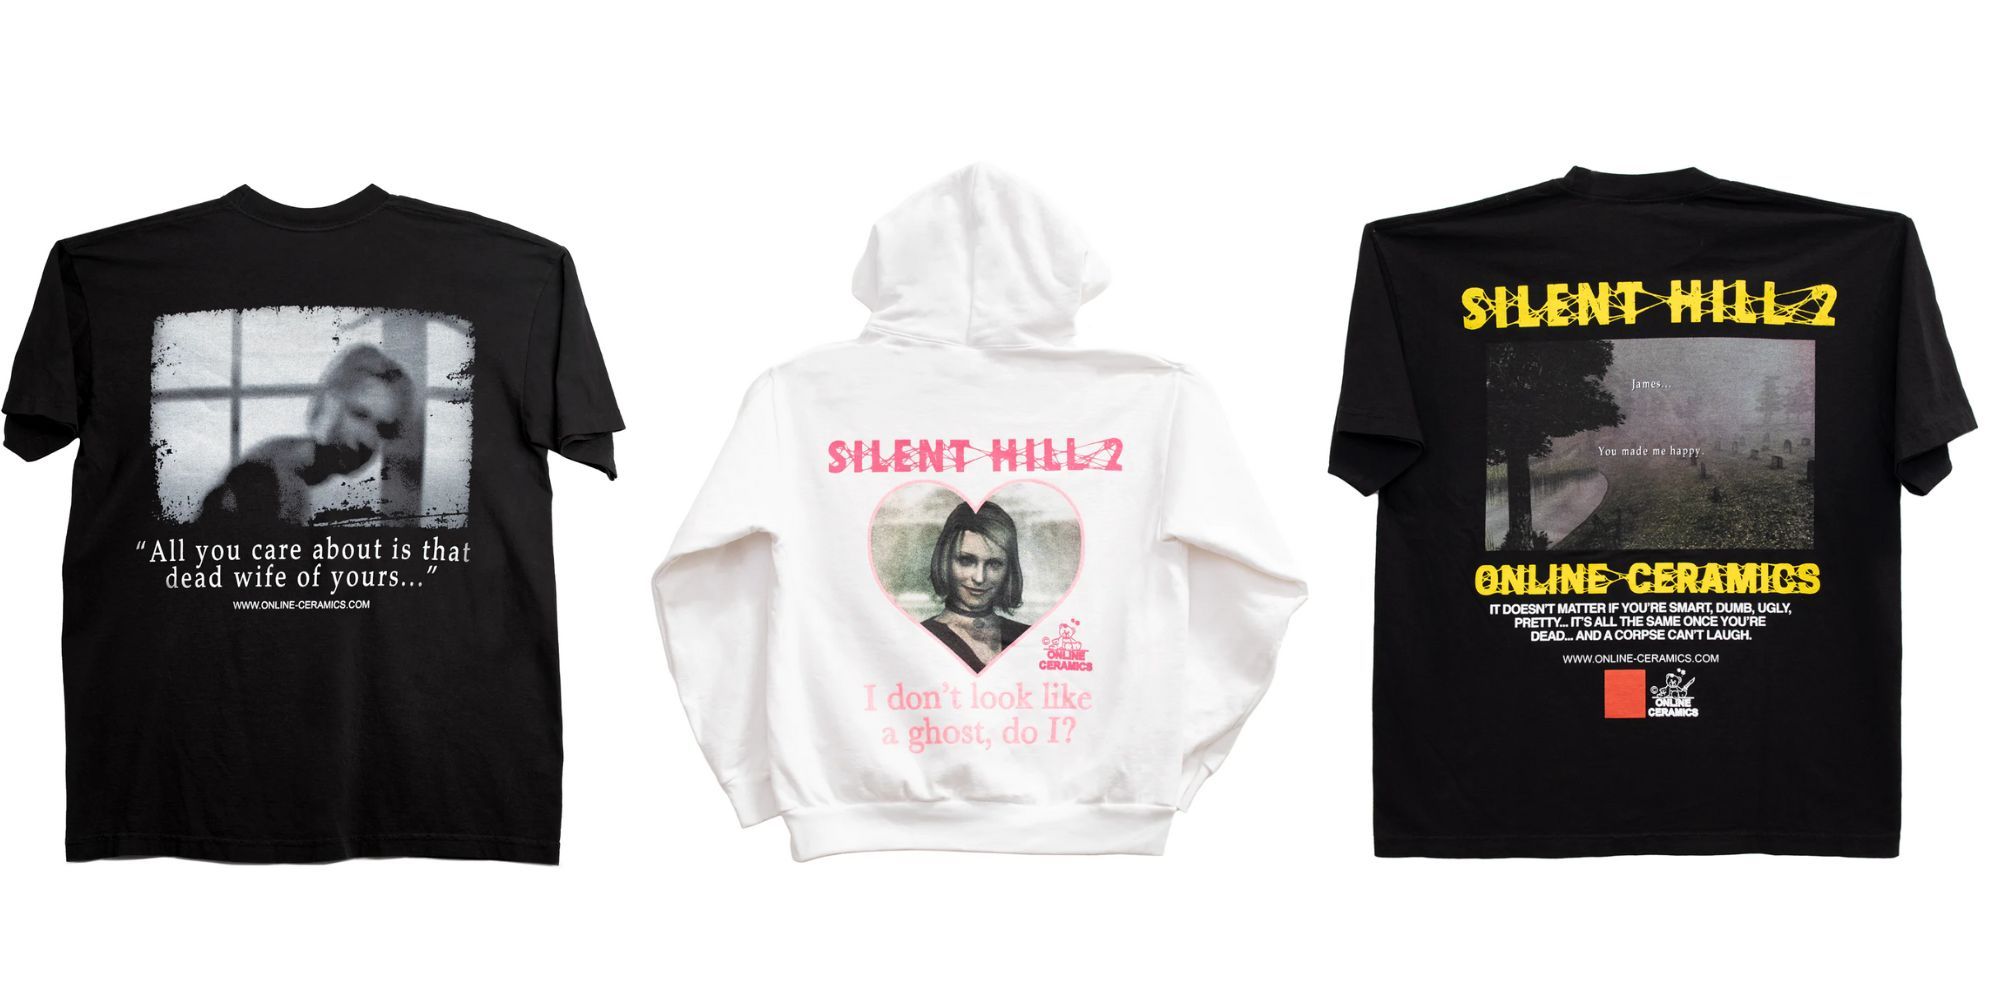 New Silent Hill 2 merch is sewing discourse among fans